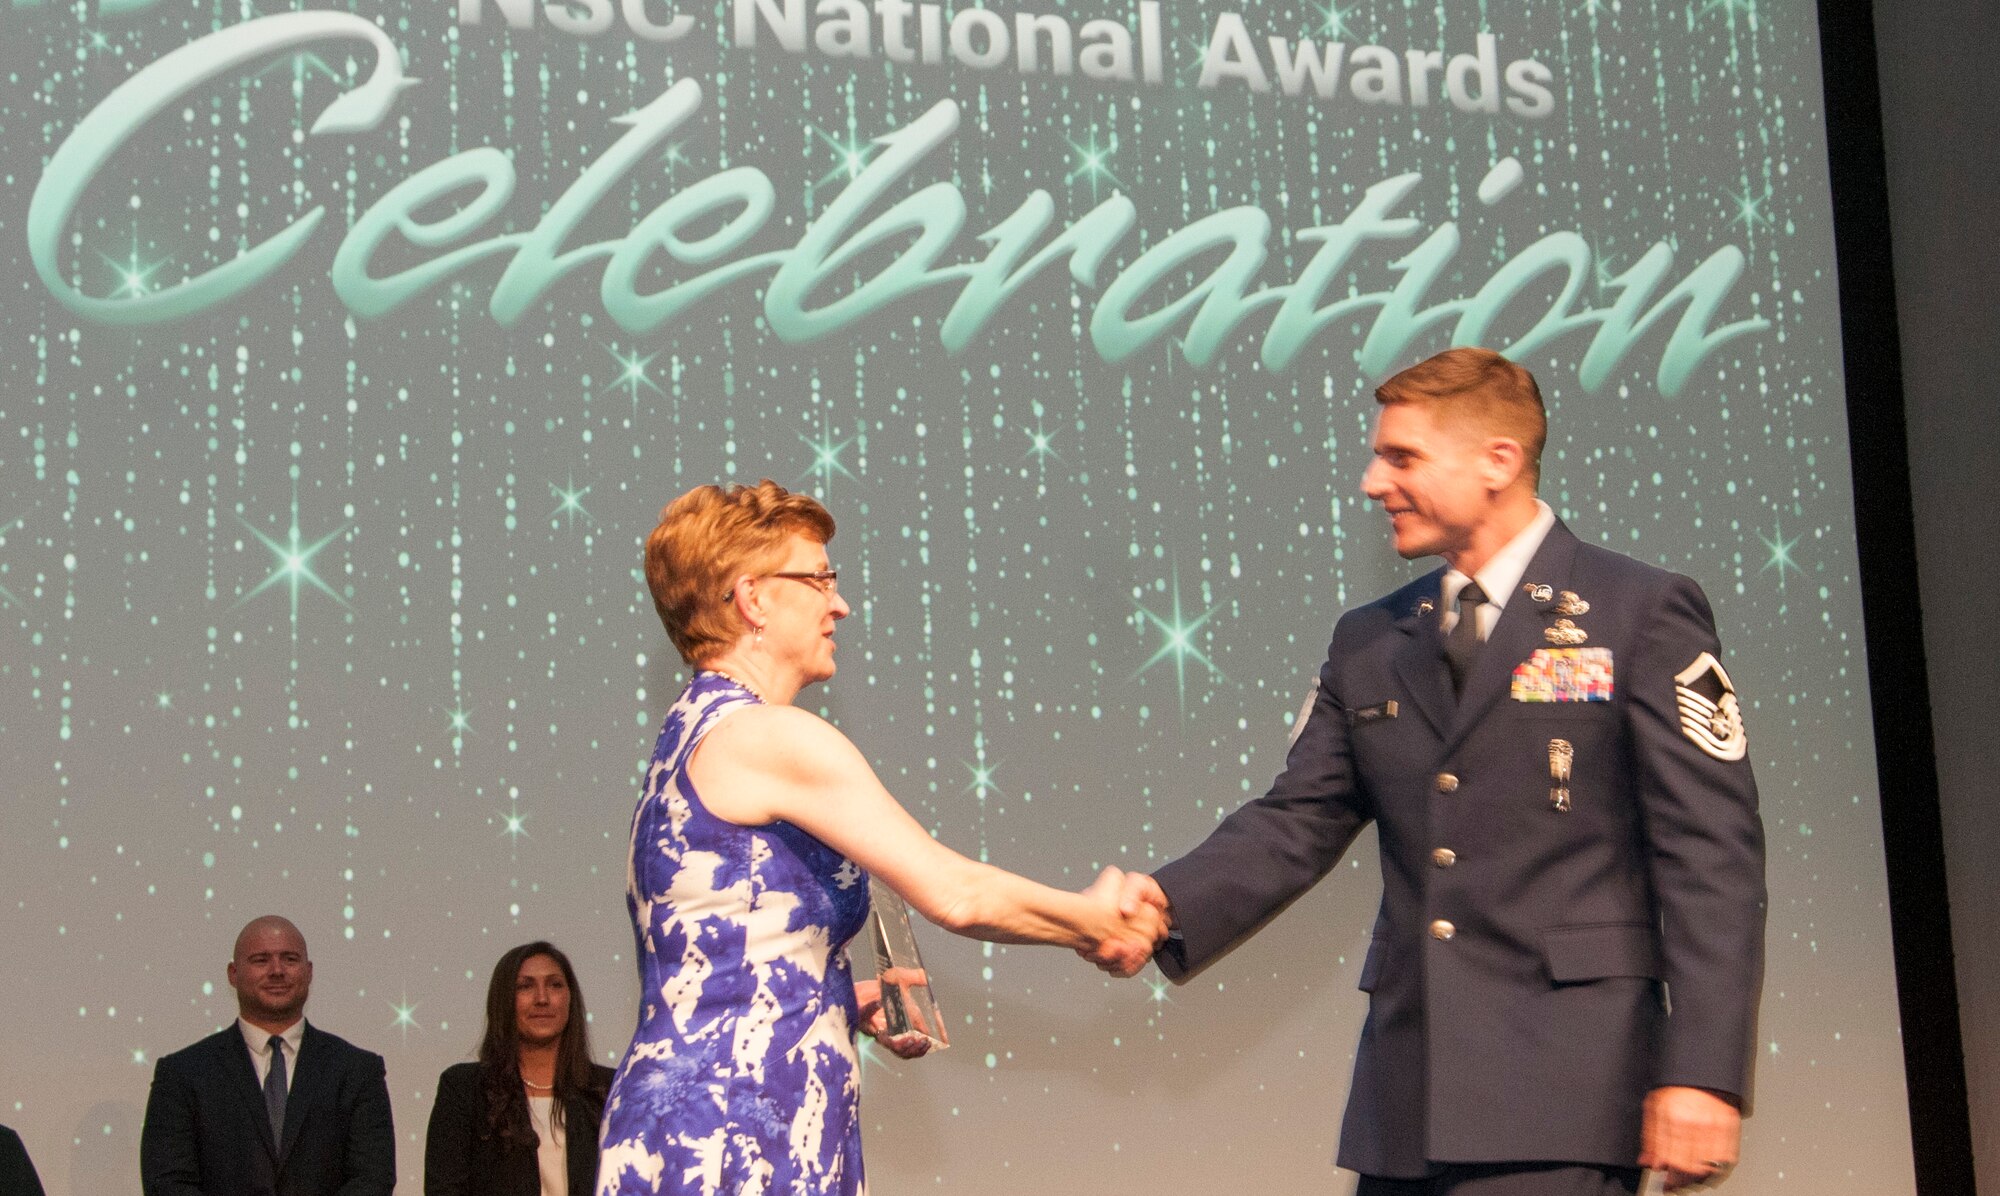 On September 9, Lorraine Martin, National Safety Council president and CEO, presented the Rising Star of Safety award to Master Sgt. Jeremy Nixon, Headquarters Pacific Air Forces occupational safety manager, for his continued dedication to safety and contributions to the Air Force safety community.